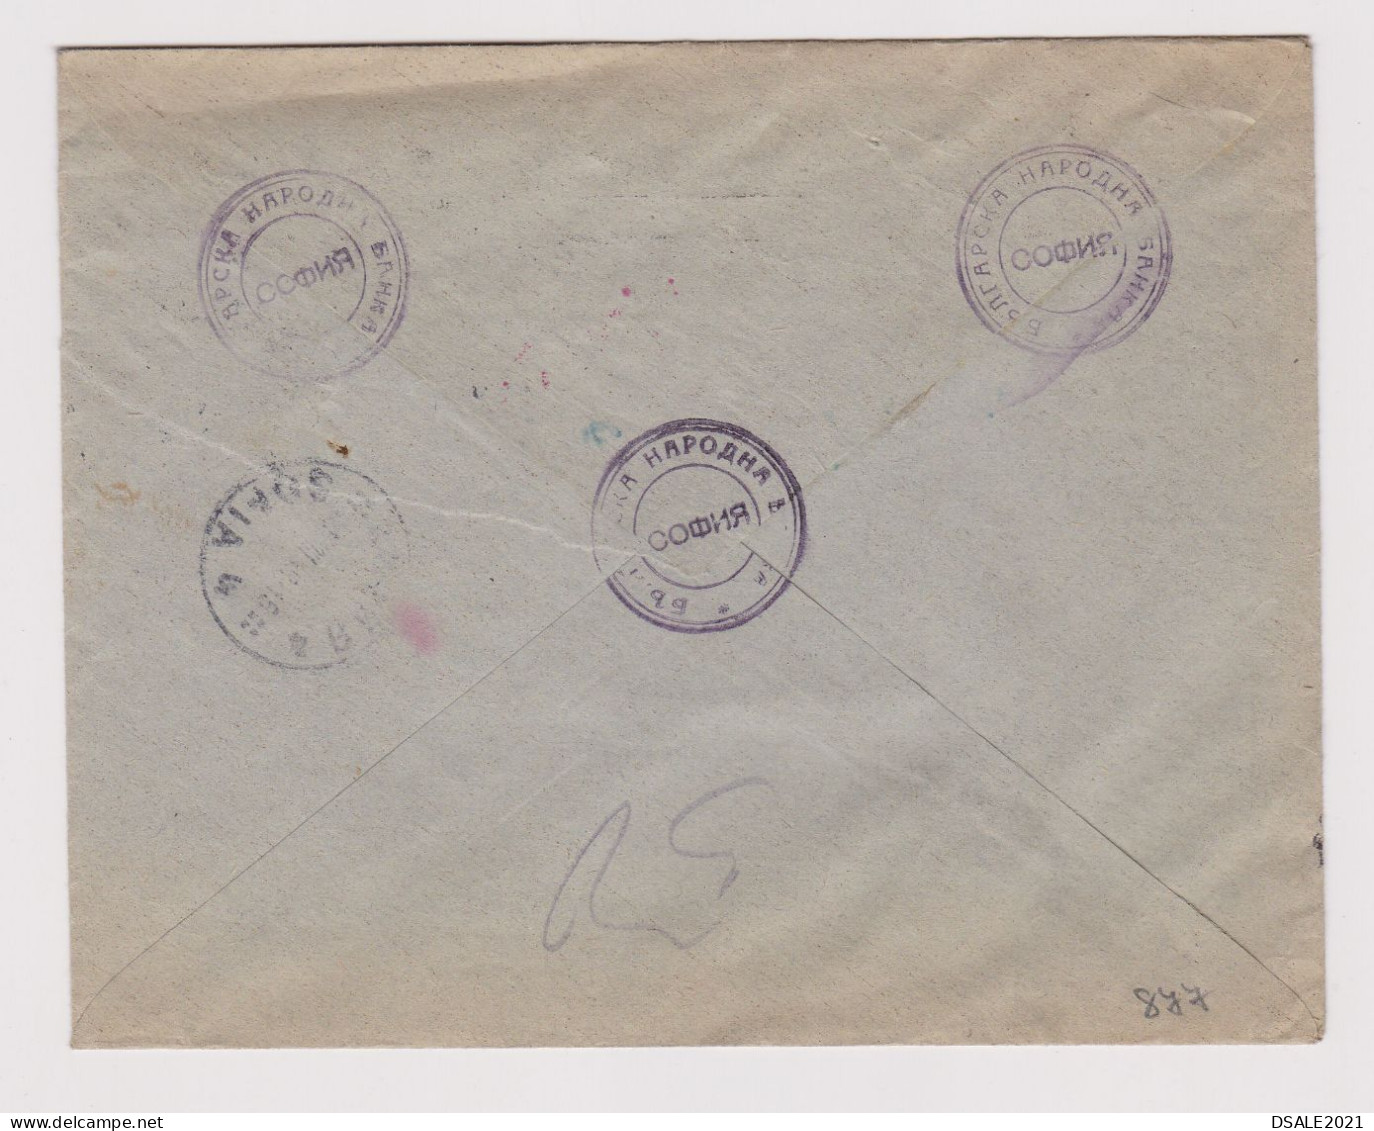 Bulgaria Bulgarien 1940s Registered Bank Cover With Perfin, Topic Stamps, Domestic Used Rare (877) - Lettres & Documents